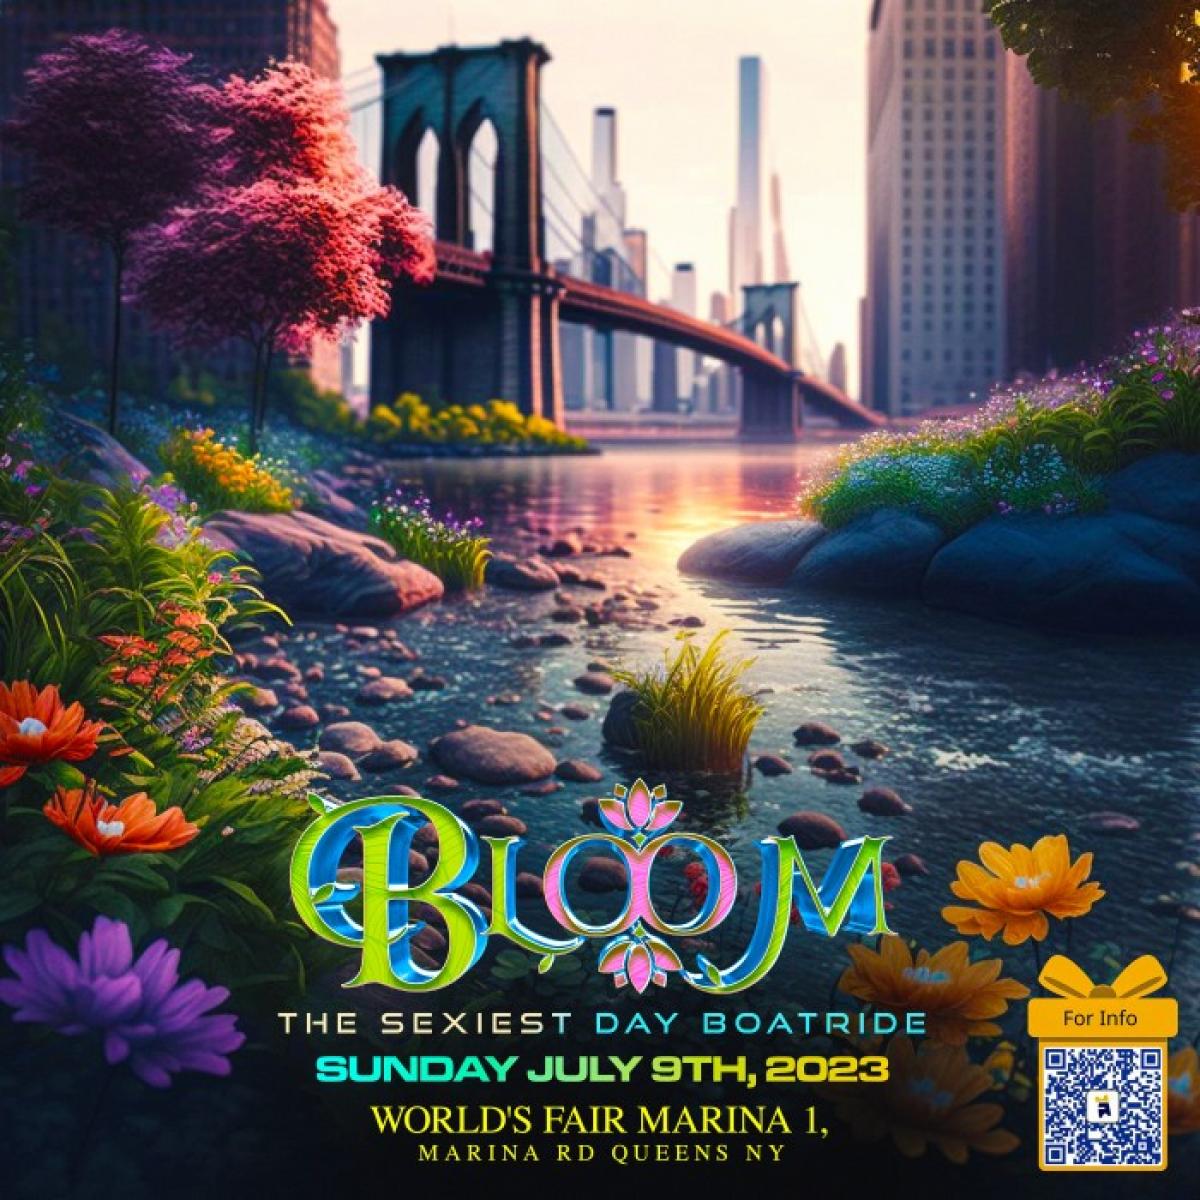 Bloom: The Sexiest Day Boatride flyer or graphic.